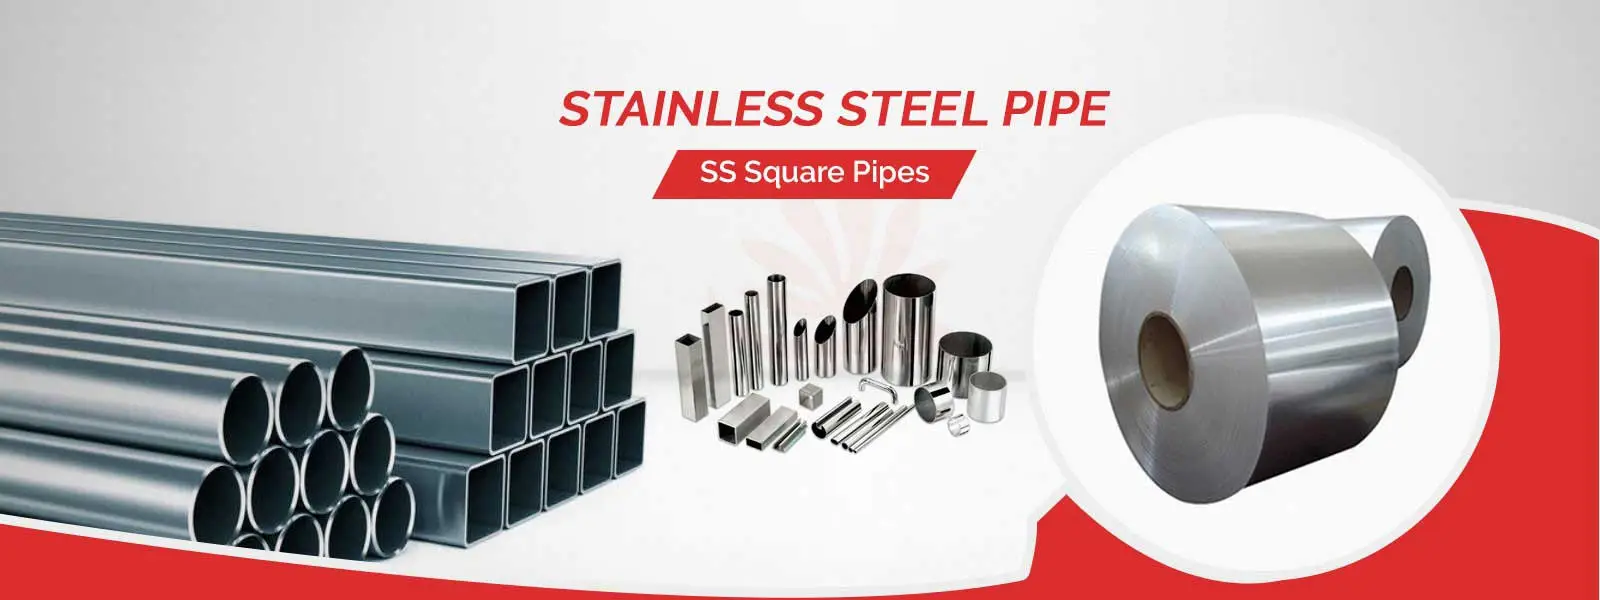 Stainless Steel Pipe Manufacturers in Bangalore